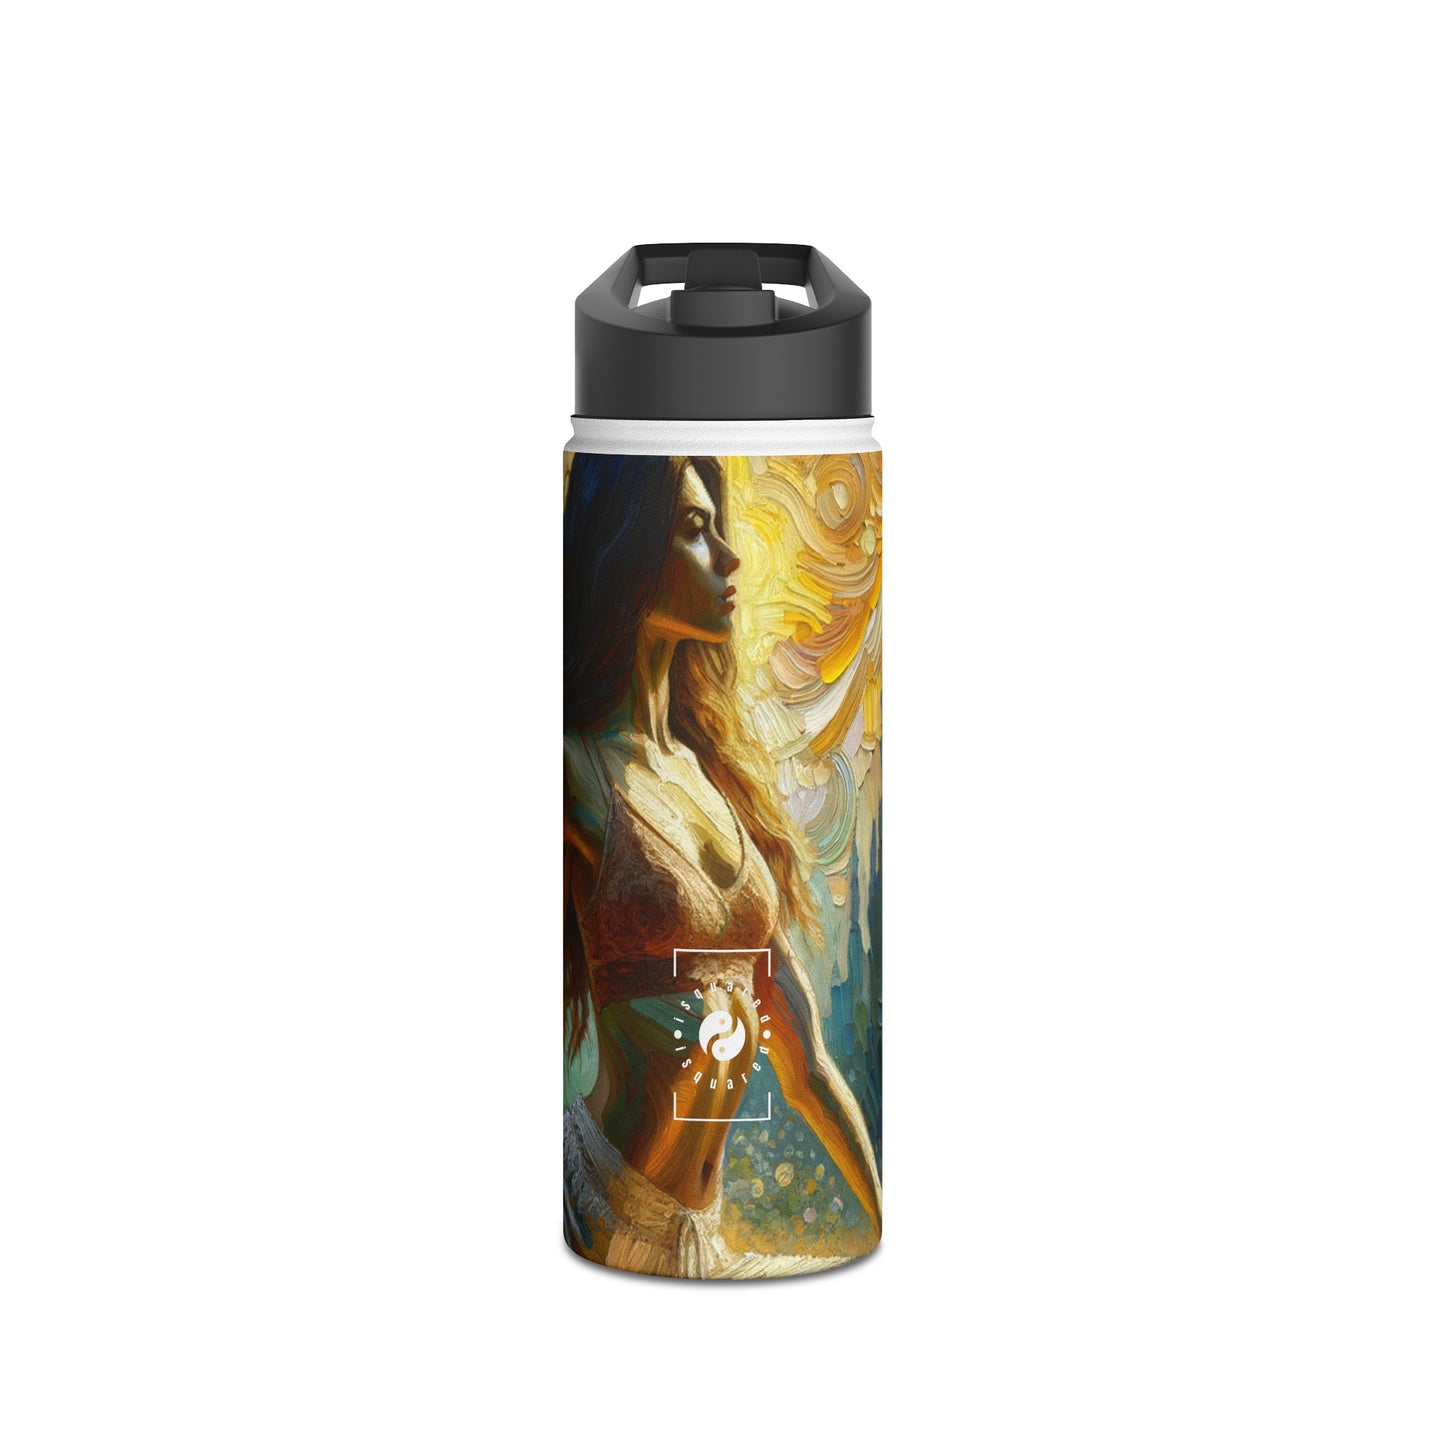 "Golden Warrior: A Tranquil Harmony" - Water Bottle